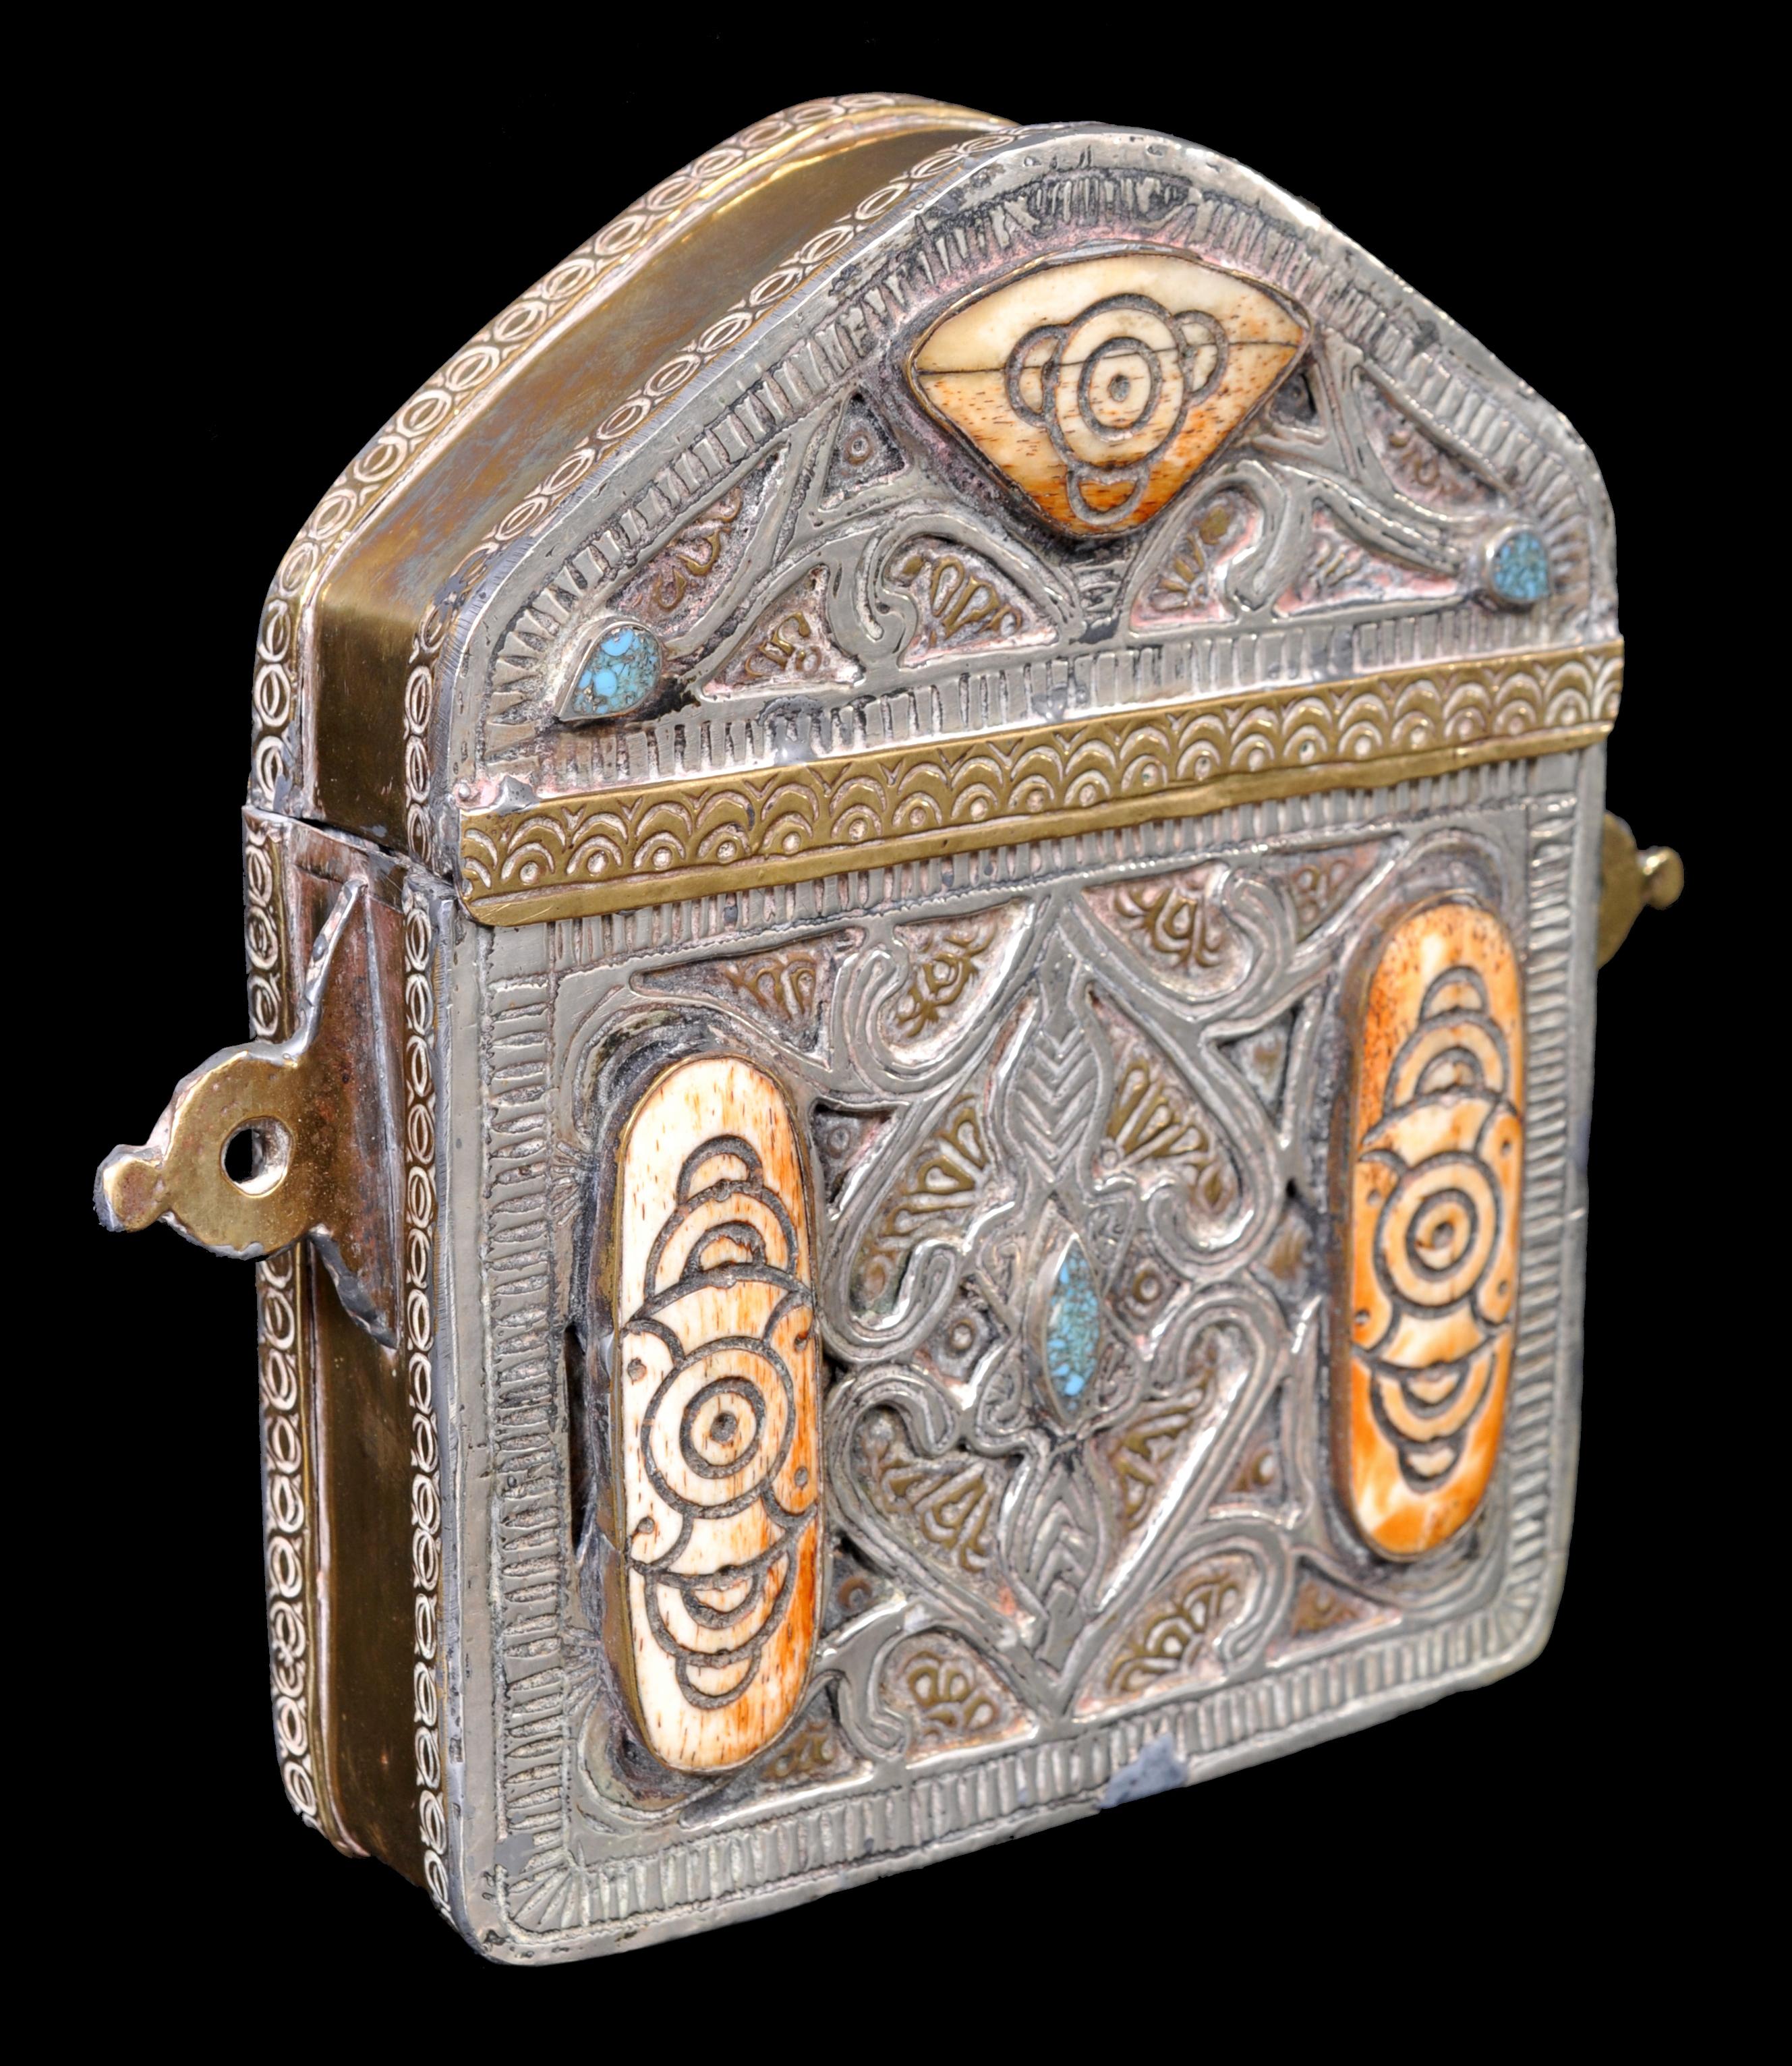 Antique 19th century Islamic brass and silver inlaid Koran/Qur'an case, circa 1890. Antique late 19th century Islamic holy Qur'an portable carrying case, made of brass and silver, most likely North African (Morocco). The hinged case ornately